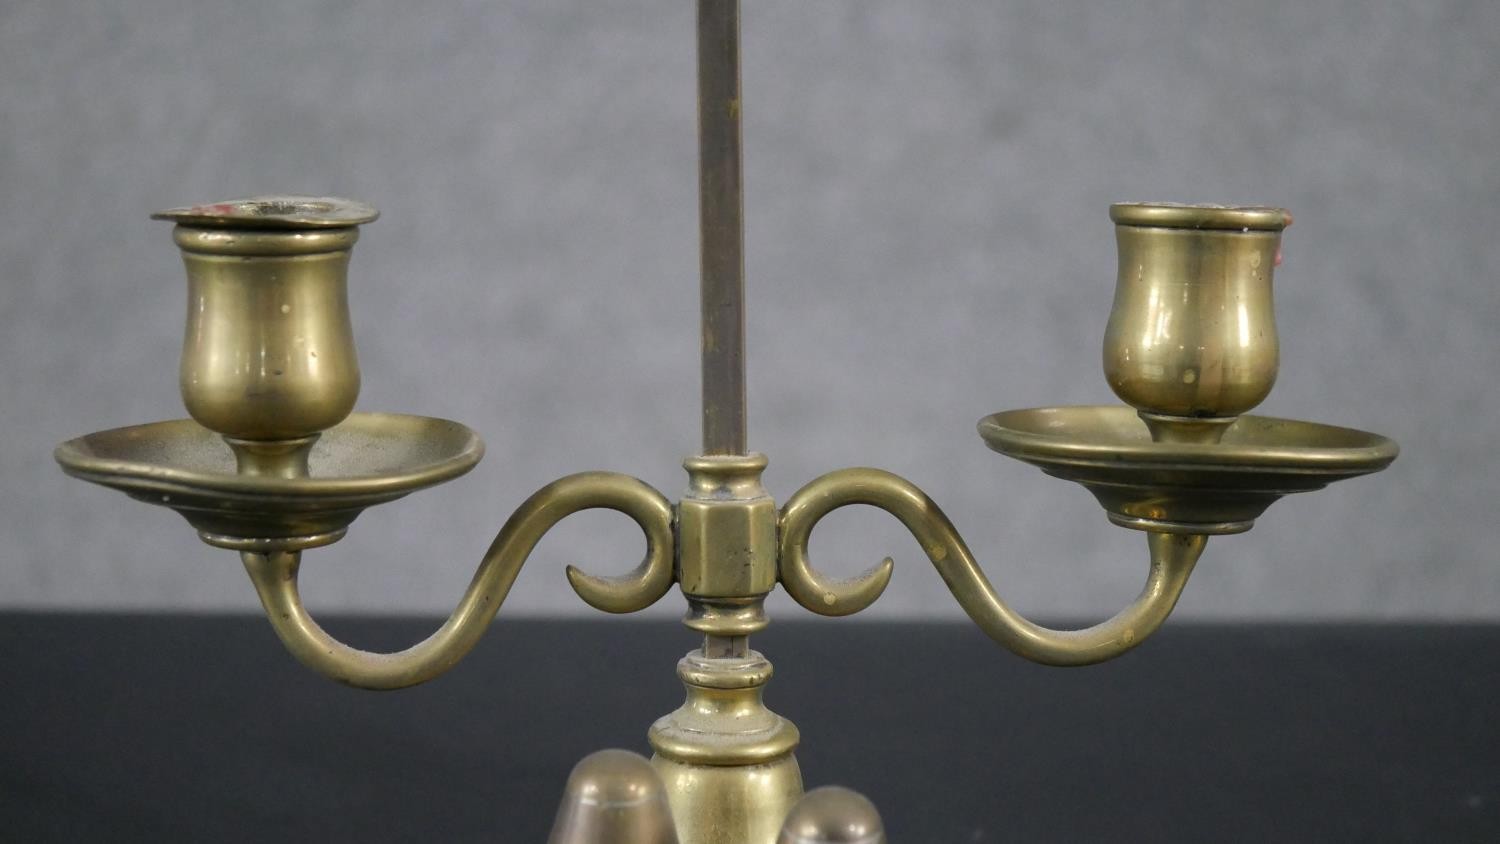 A 19th century brass double rise and fall student's candle lamp with scrolled arm supports. H.49 W. - Image 4 of 8